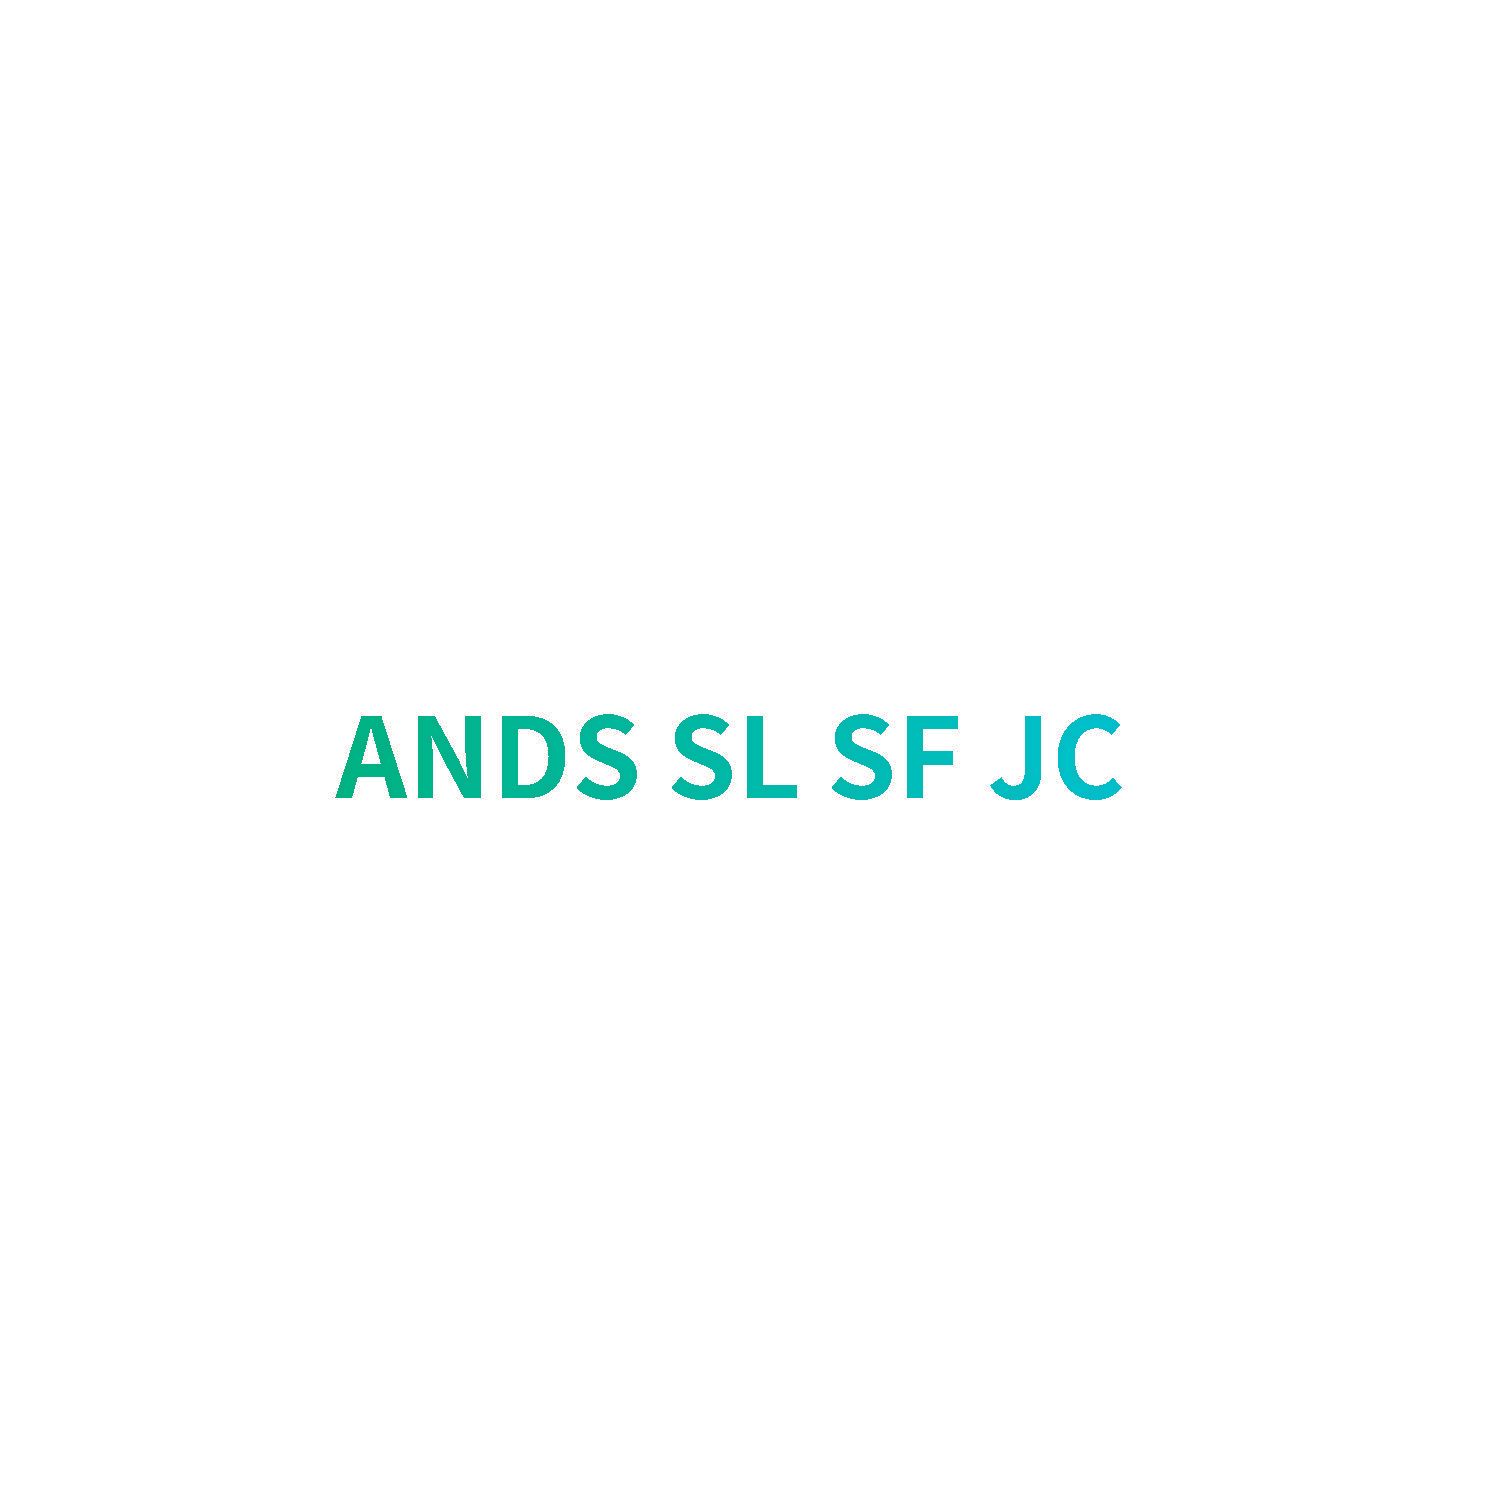 ANDS SL SF JC